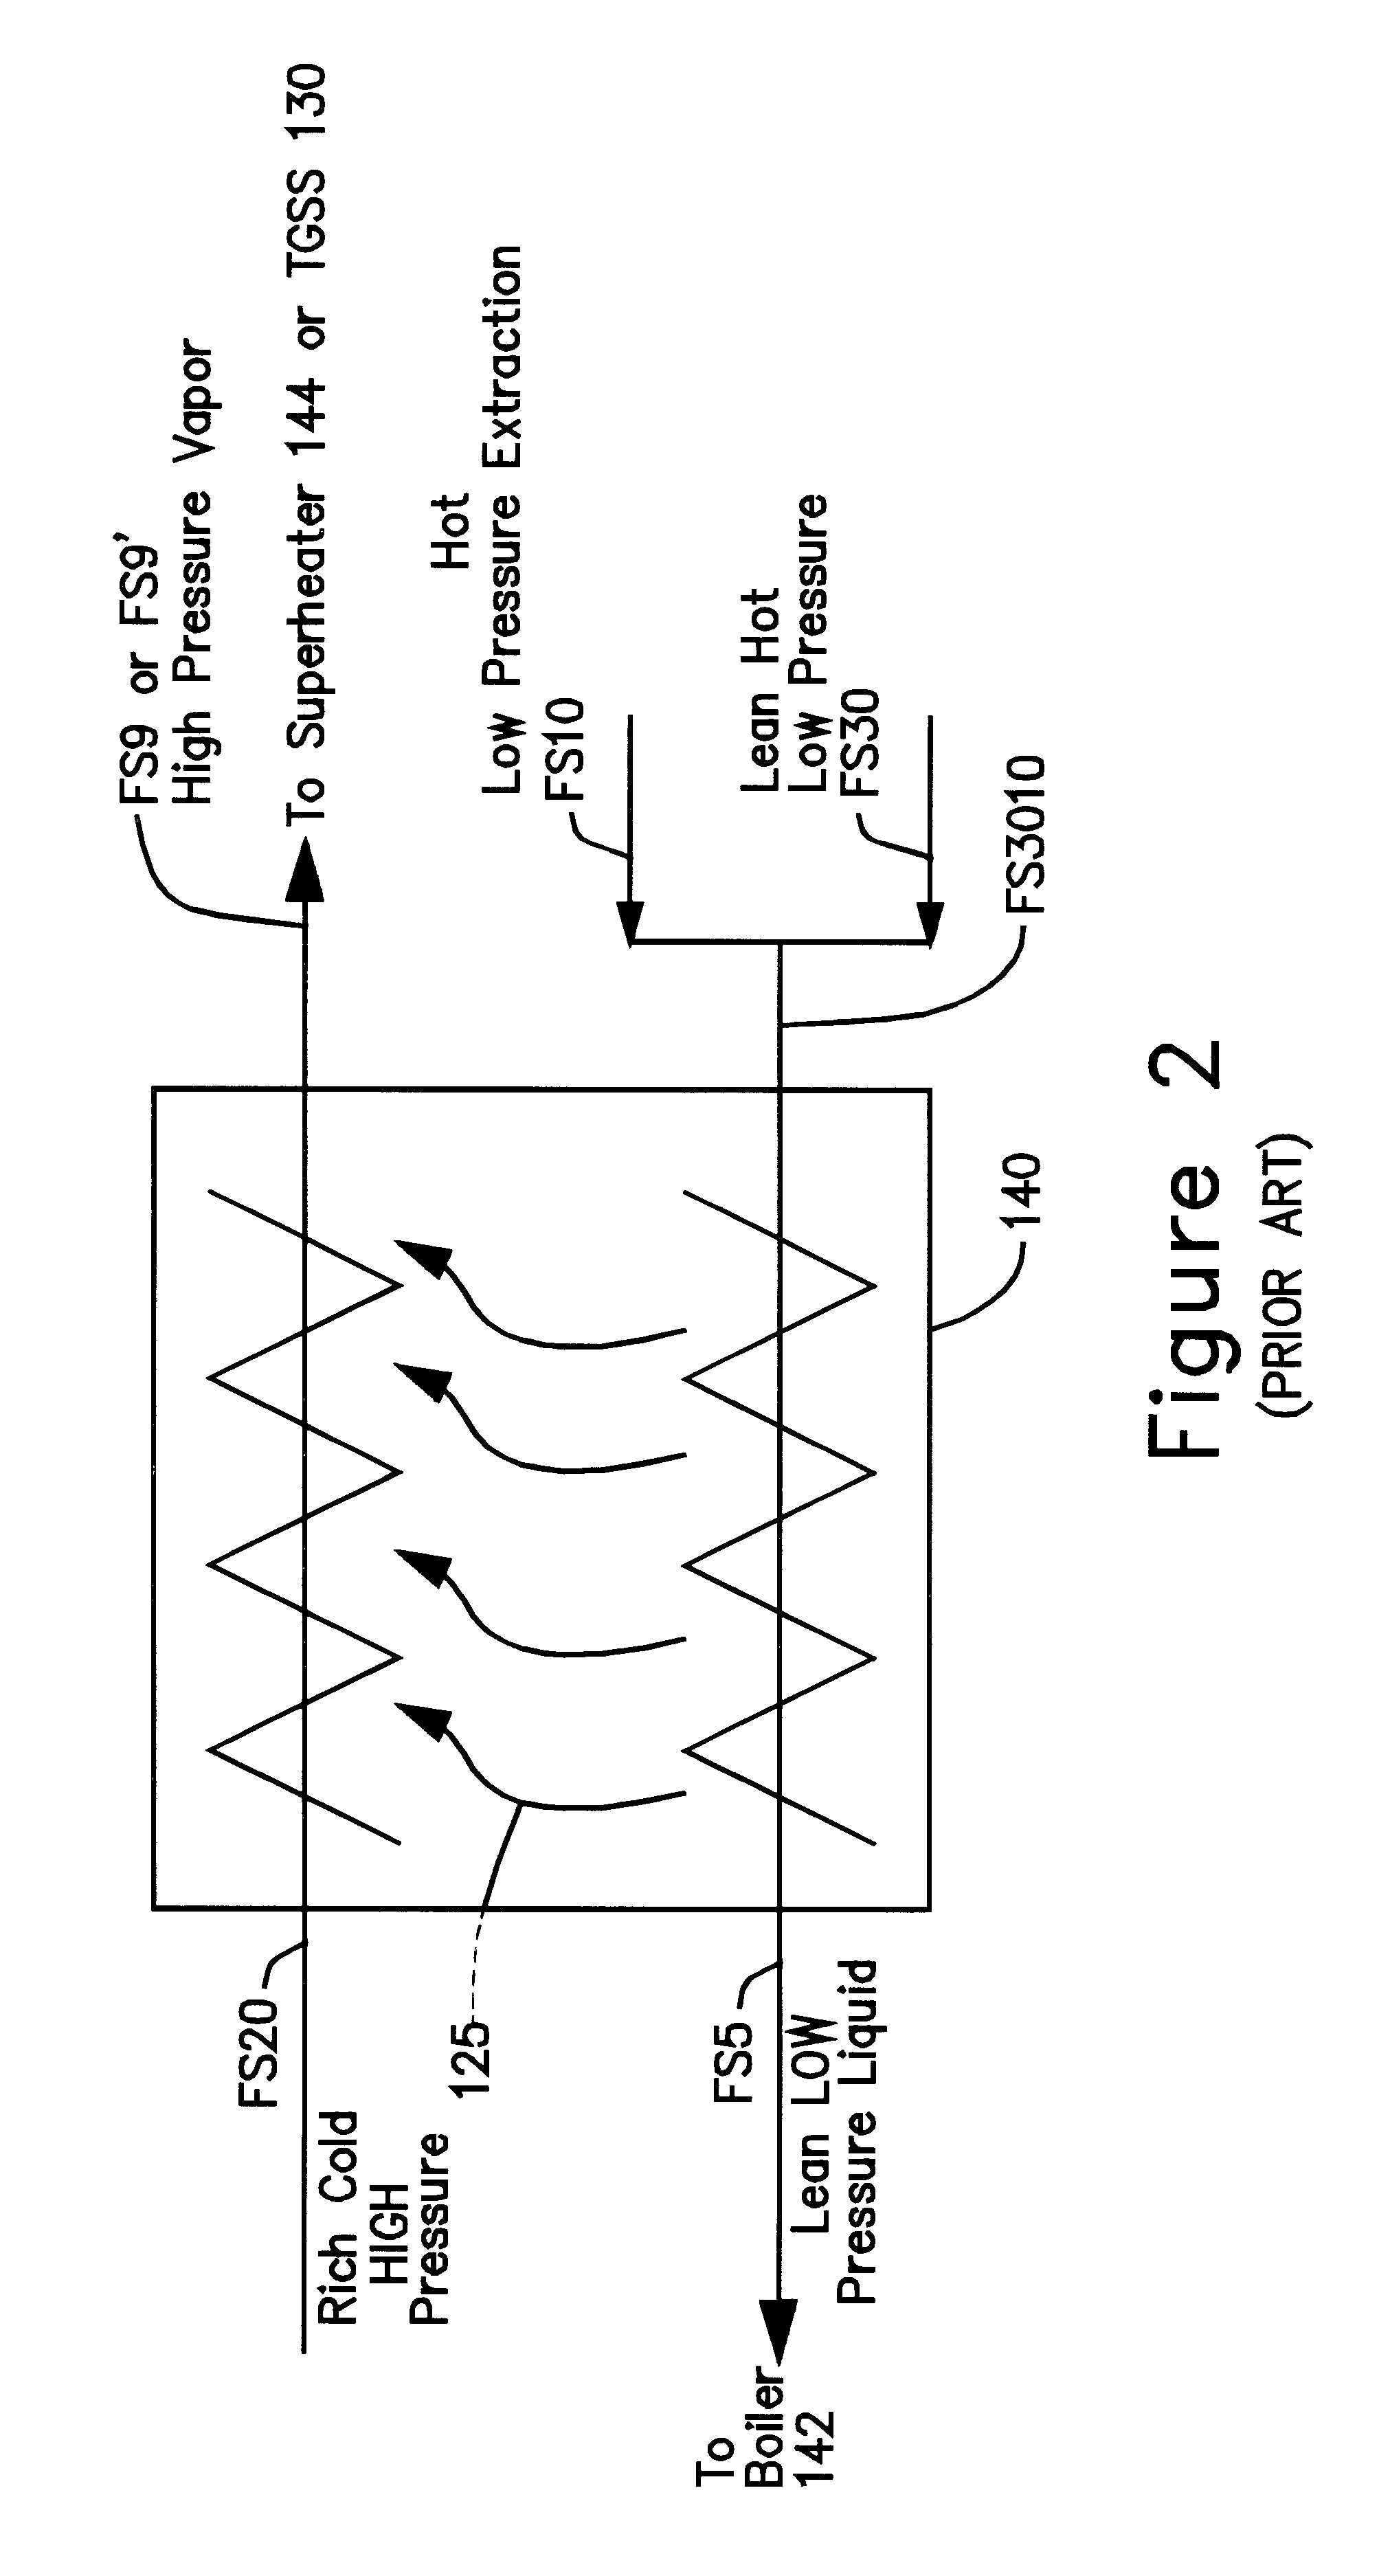 Vapor temperature control in a kalina cycle power generation system